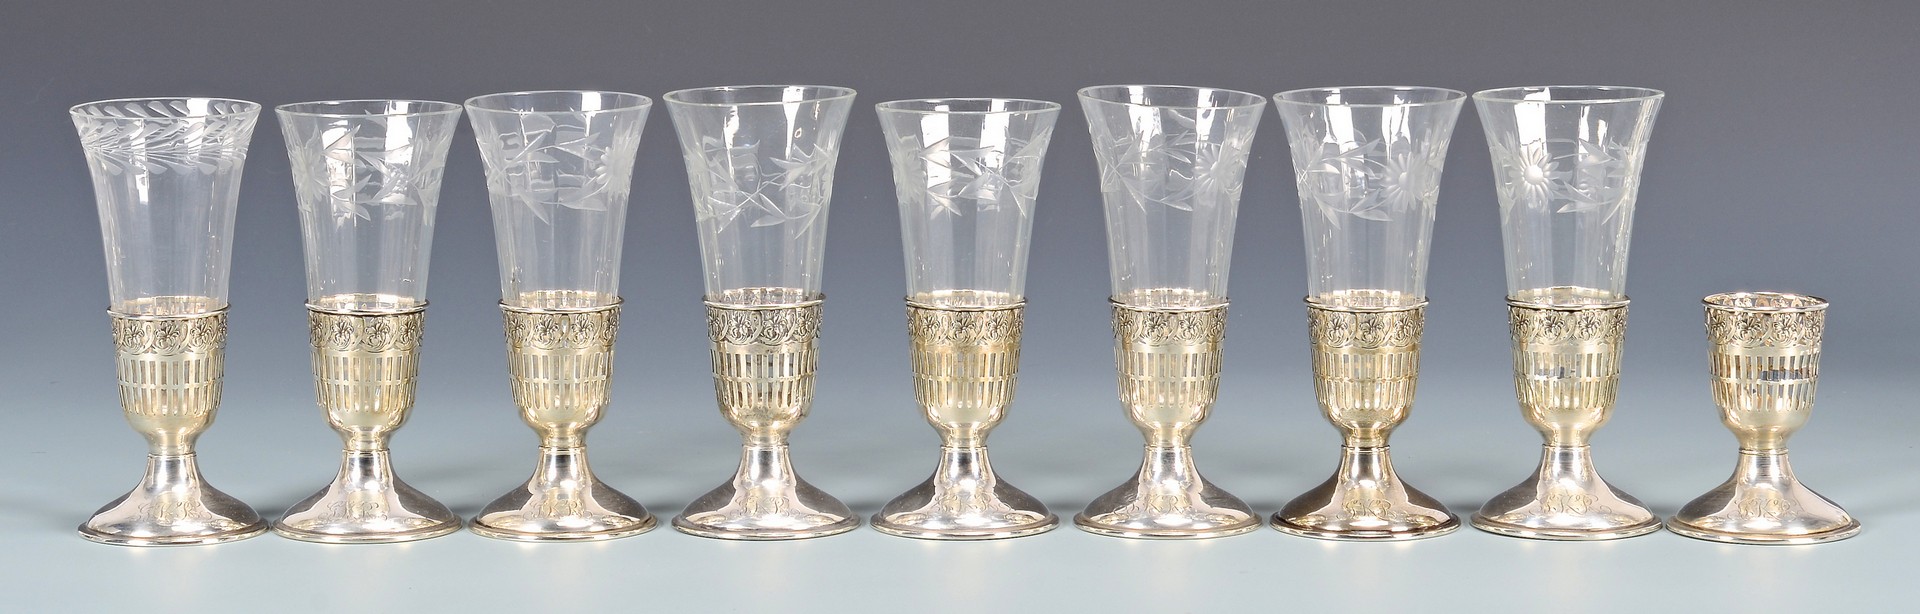 Lot 955: 8 Sterling & Crystal Cordials & 4 Compotes